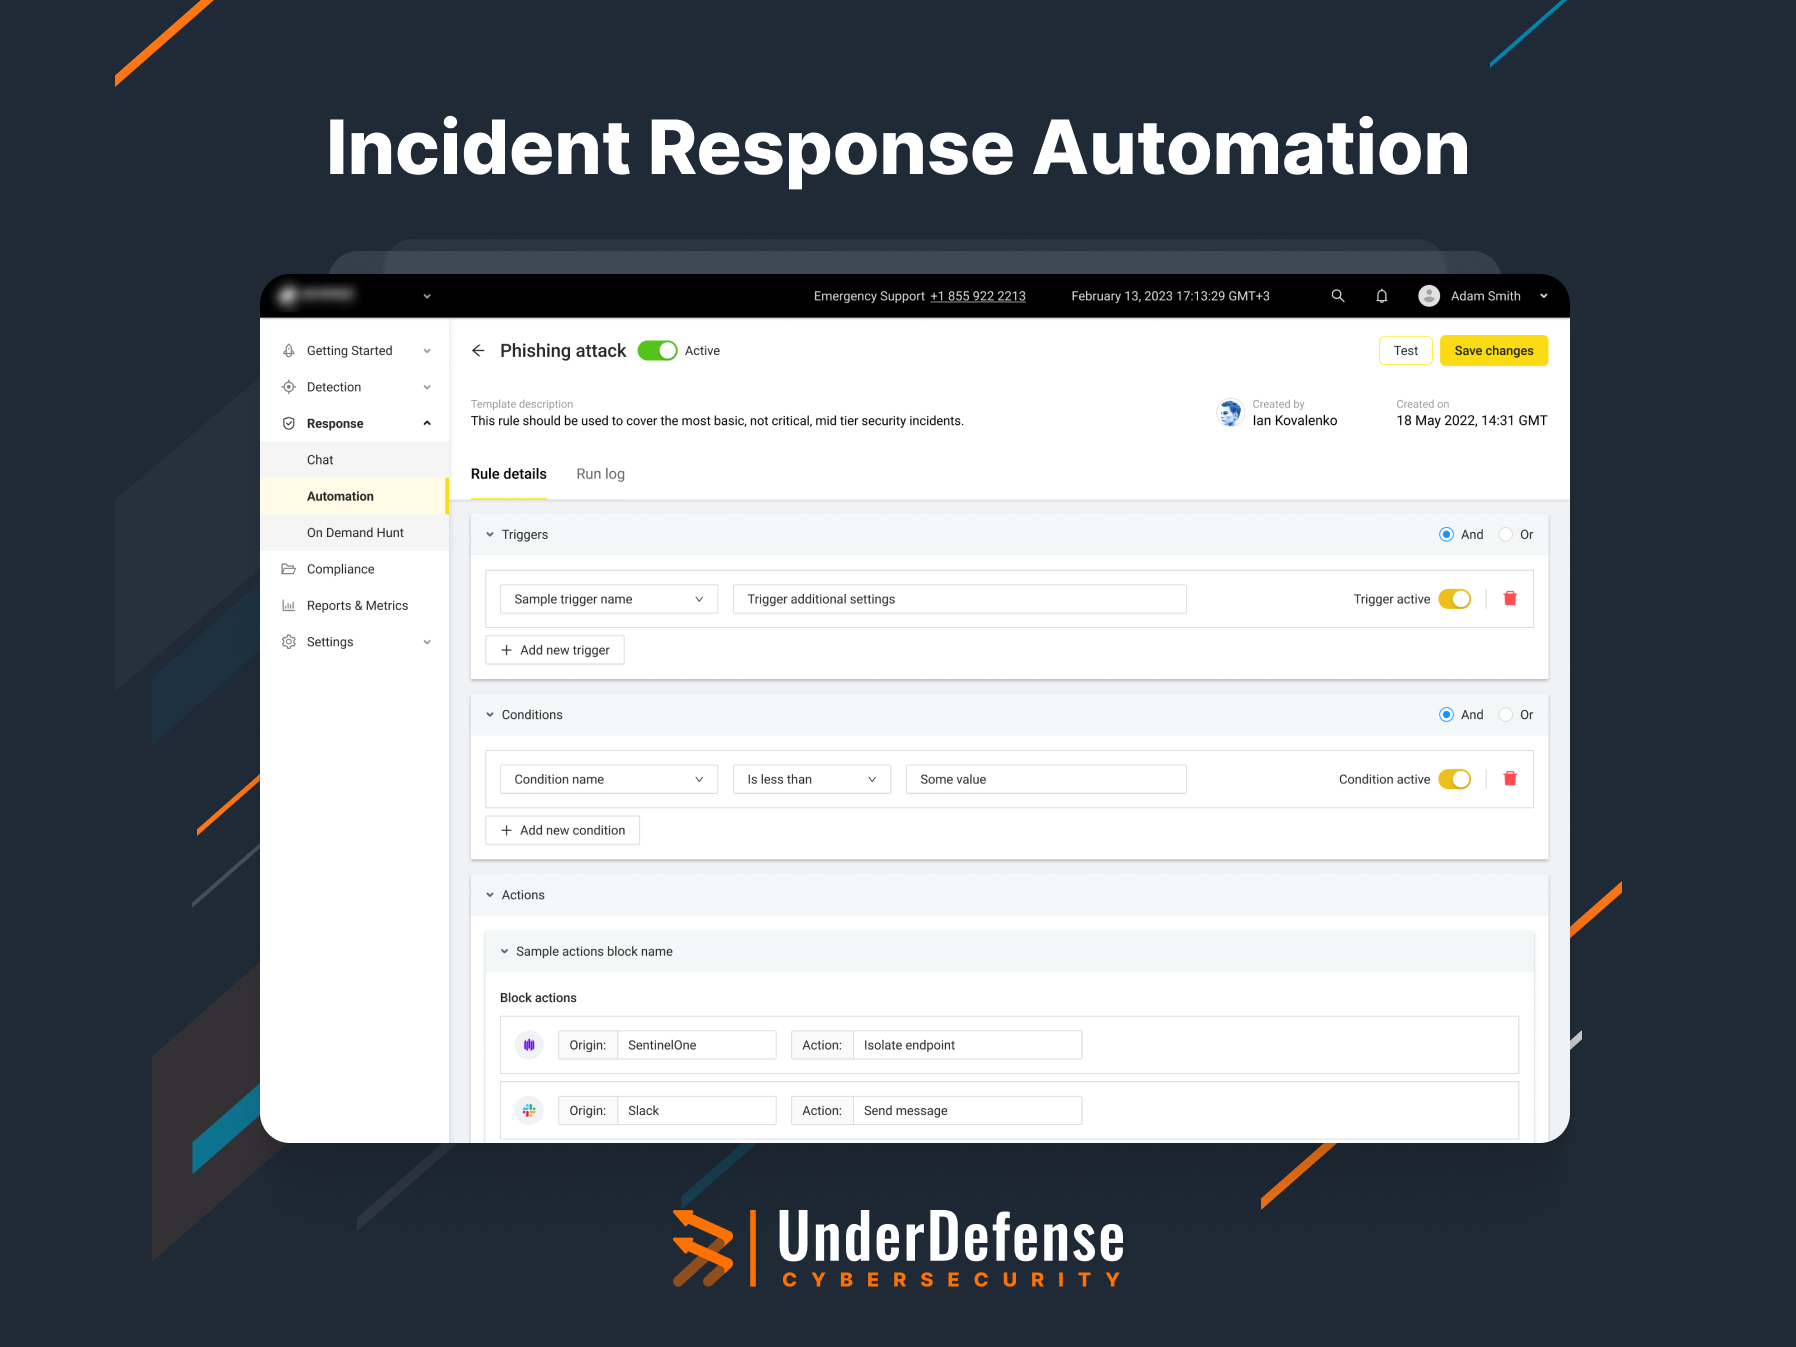 Streamline incident response effortlessly. Automate processes or collaborate with our team of experts for effective security management.